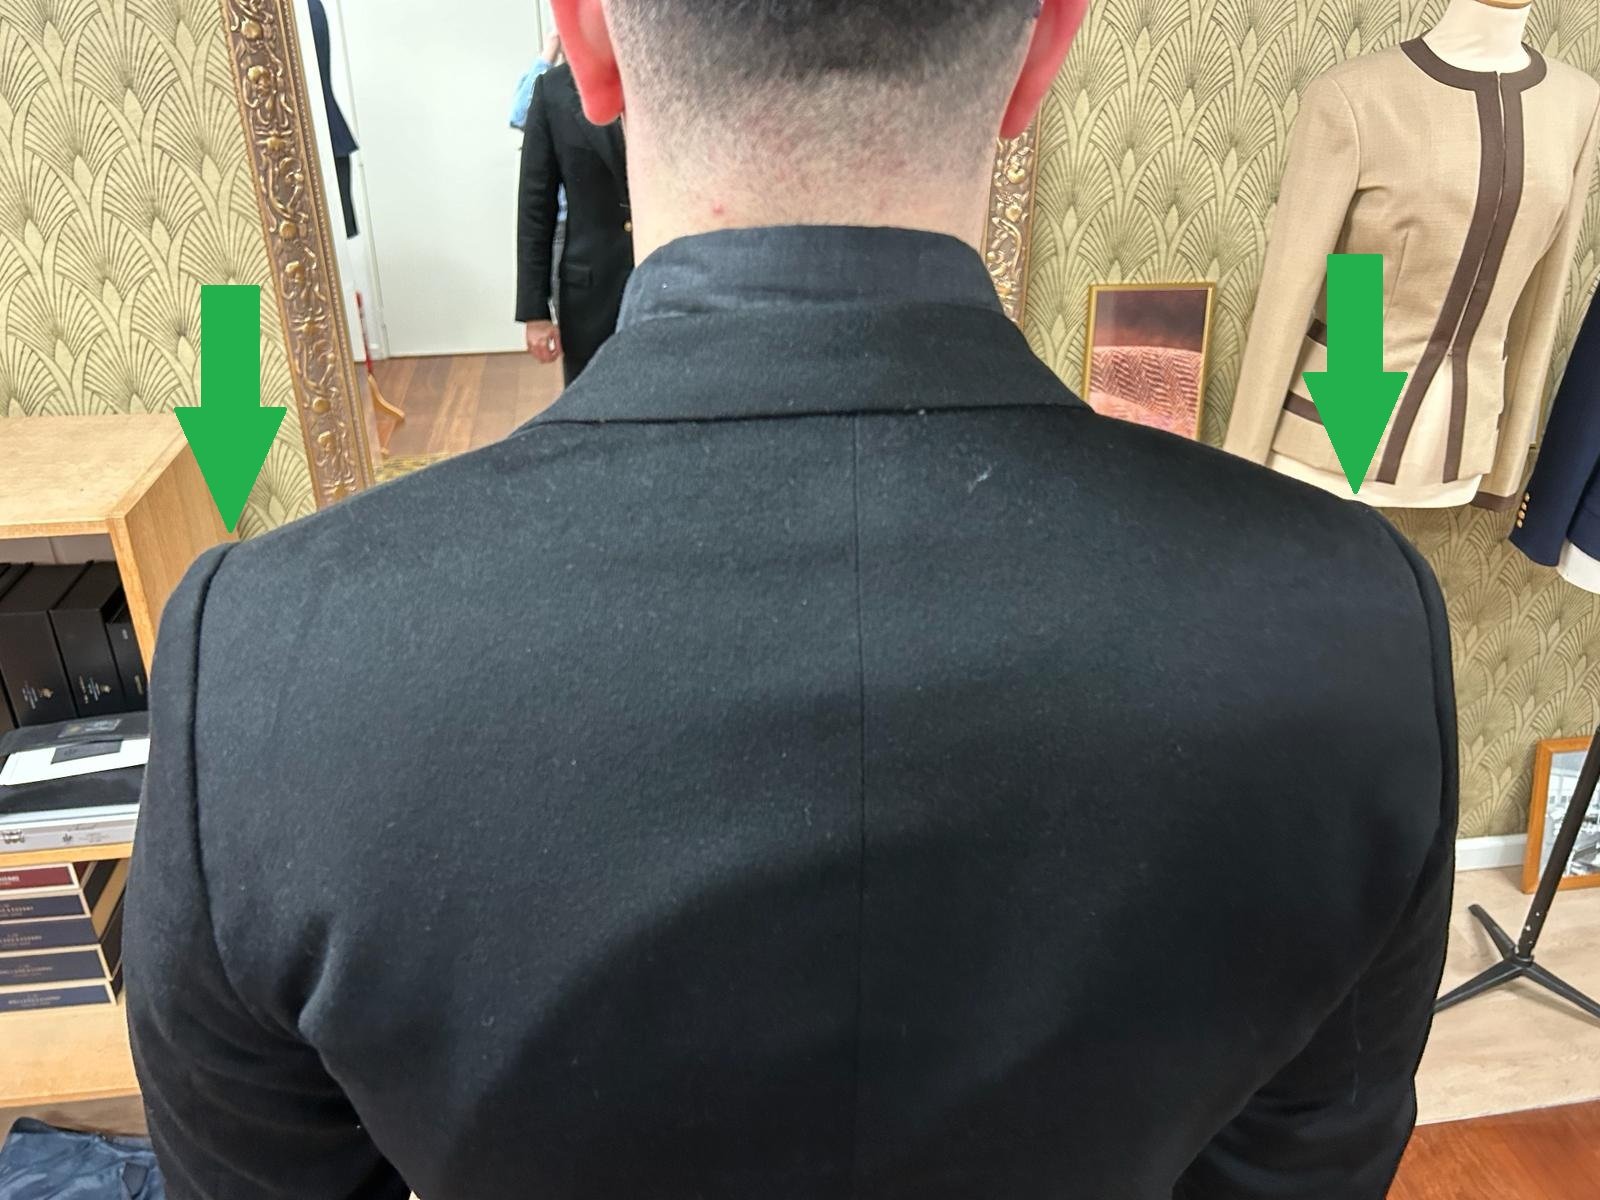 Shoulders (Suit) Jacket that are to broad and oversized after alterations, back view